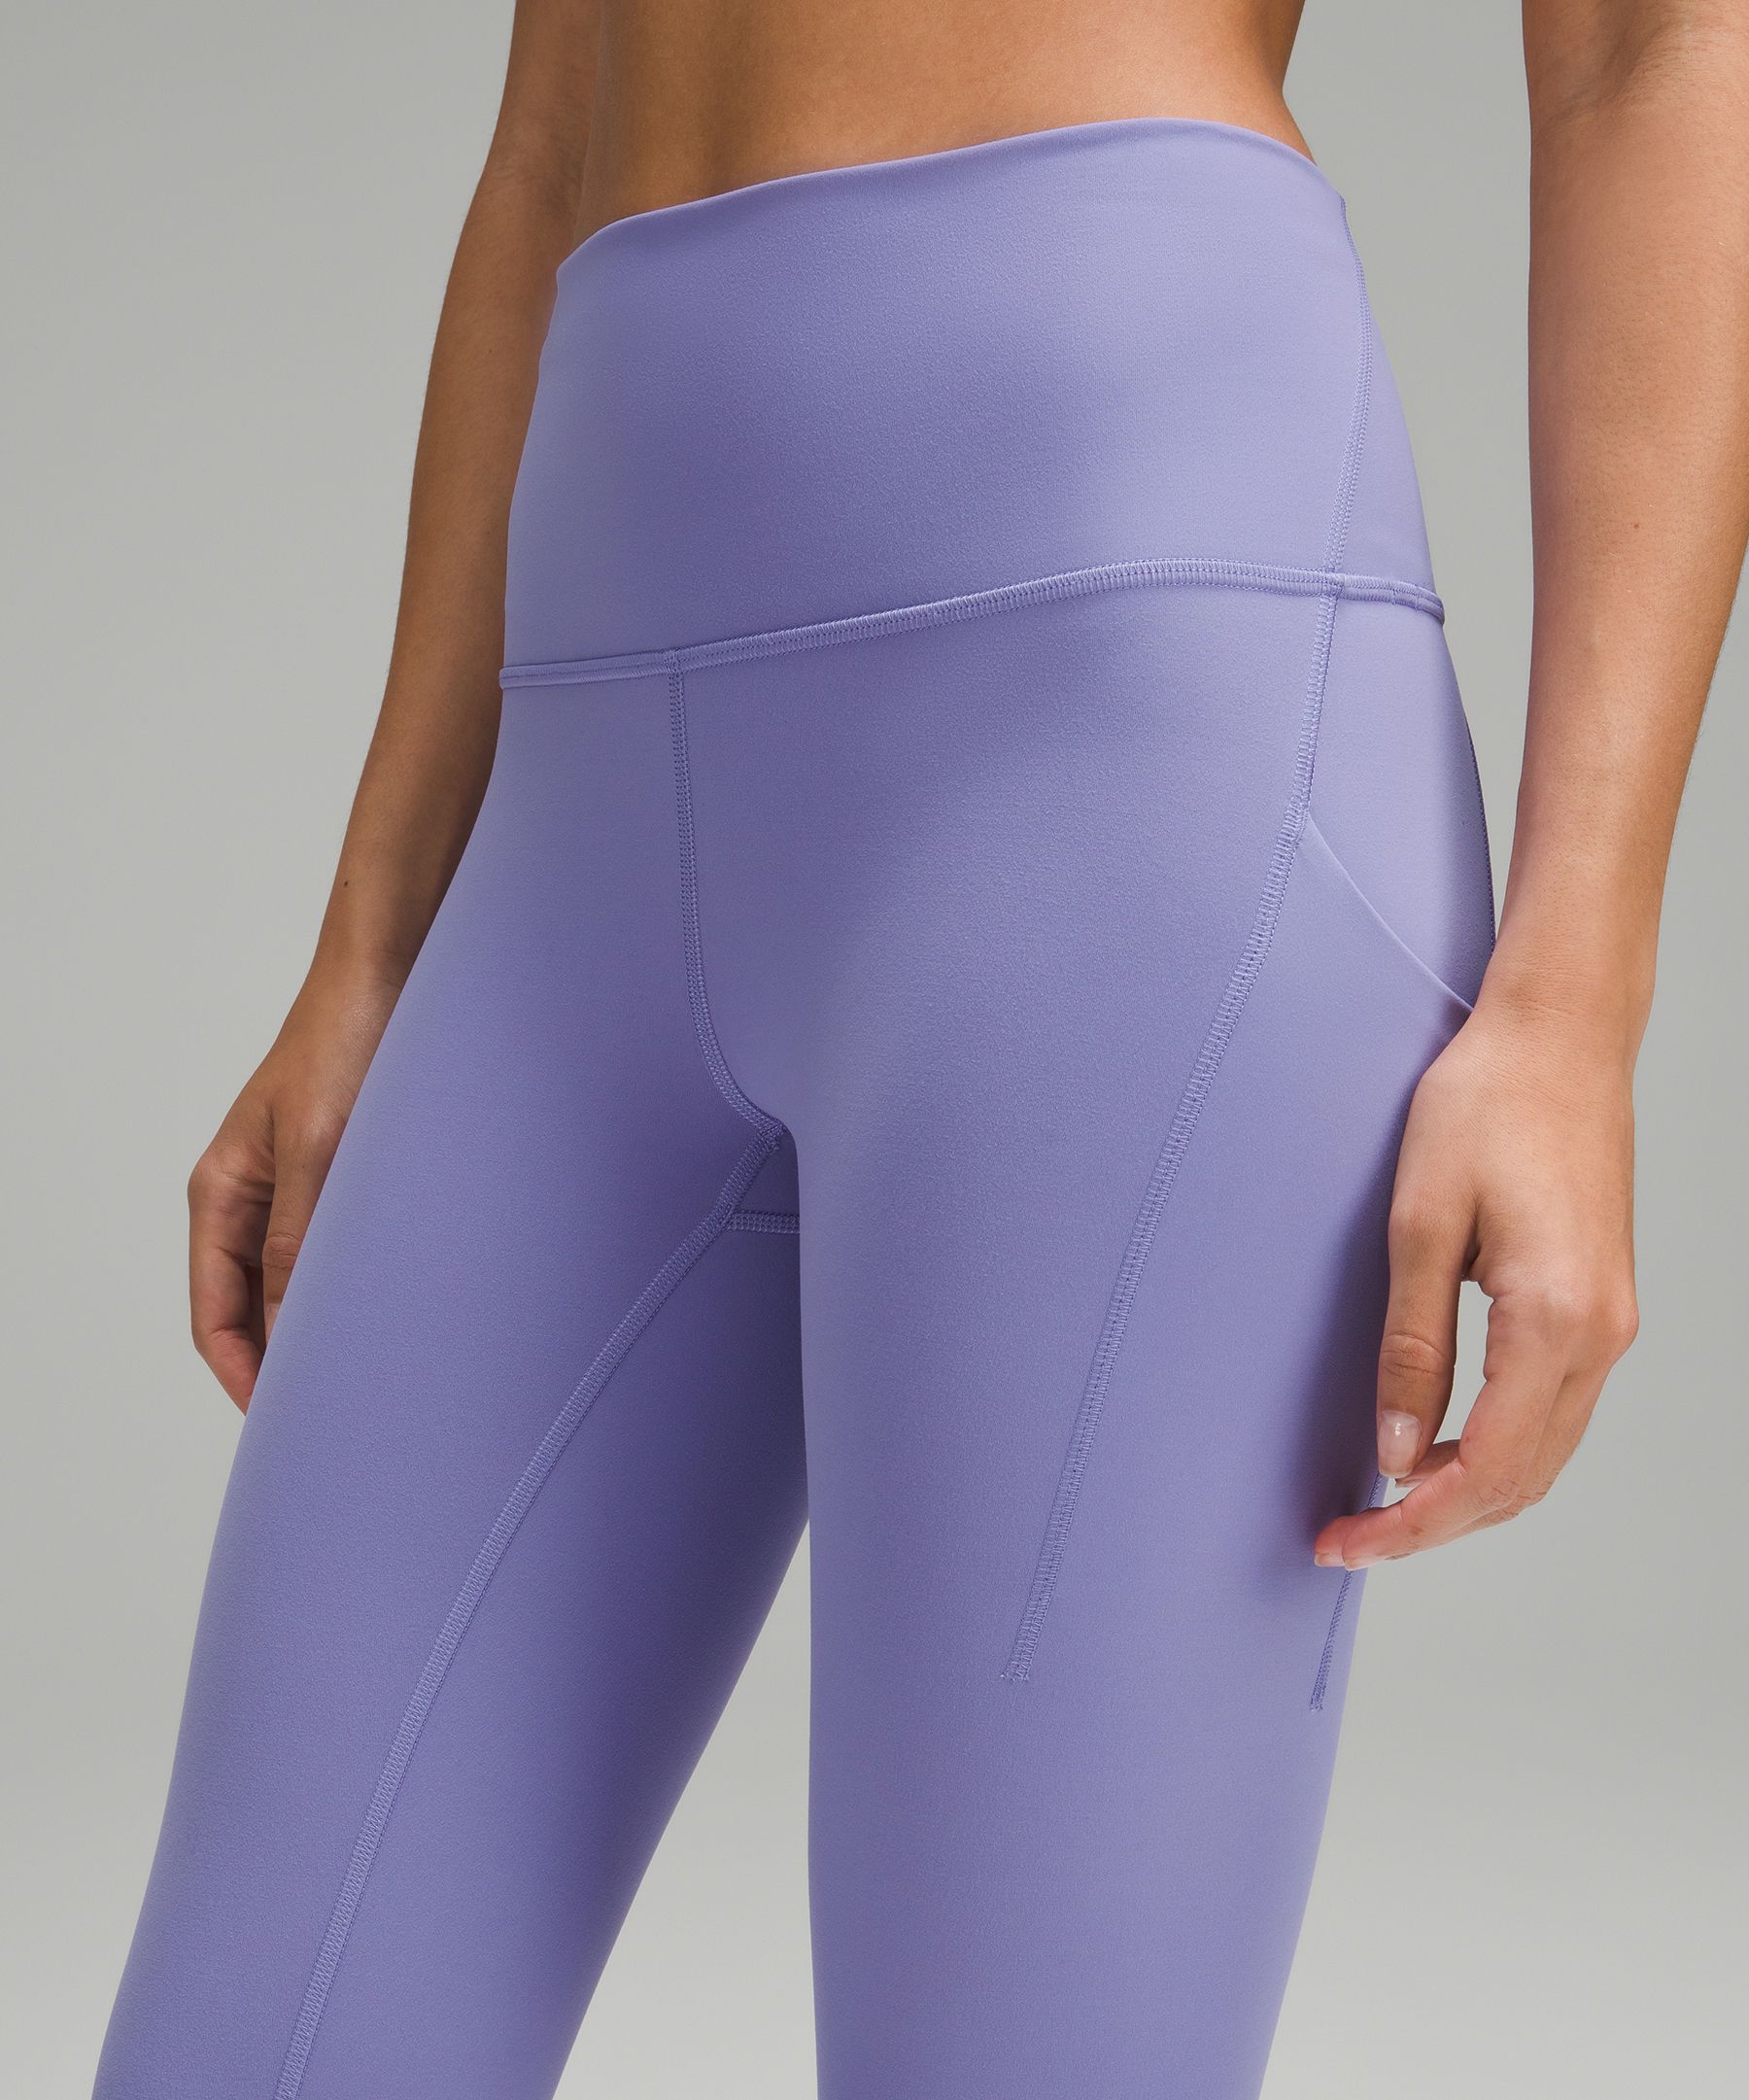 Lululemon Wunder Train High-Rise Crop with Pockets 23" *Online Only. 4